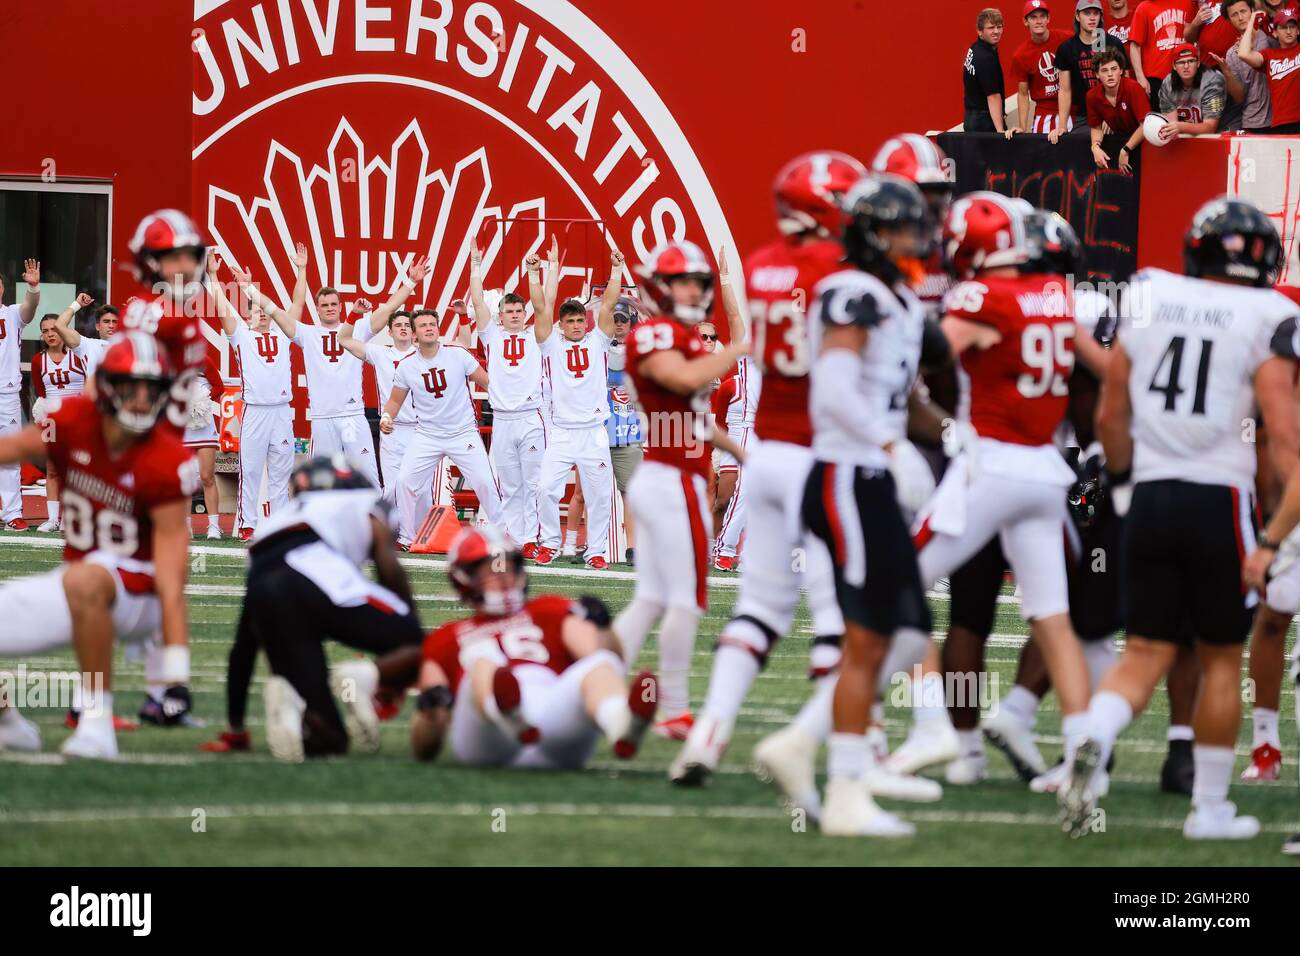 Bloomington, United States. 18th Sep, 2021. Indiana University cheerleaders celebrate Charles Campbell's 48 yard field goal against University of Cincinnati during an NCAA football game at Memorial Stadium. IU lost to Cincinnati 38-24. Credit: SOPA Images Limited/Alamy Live News Stock Photo